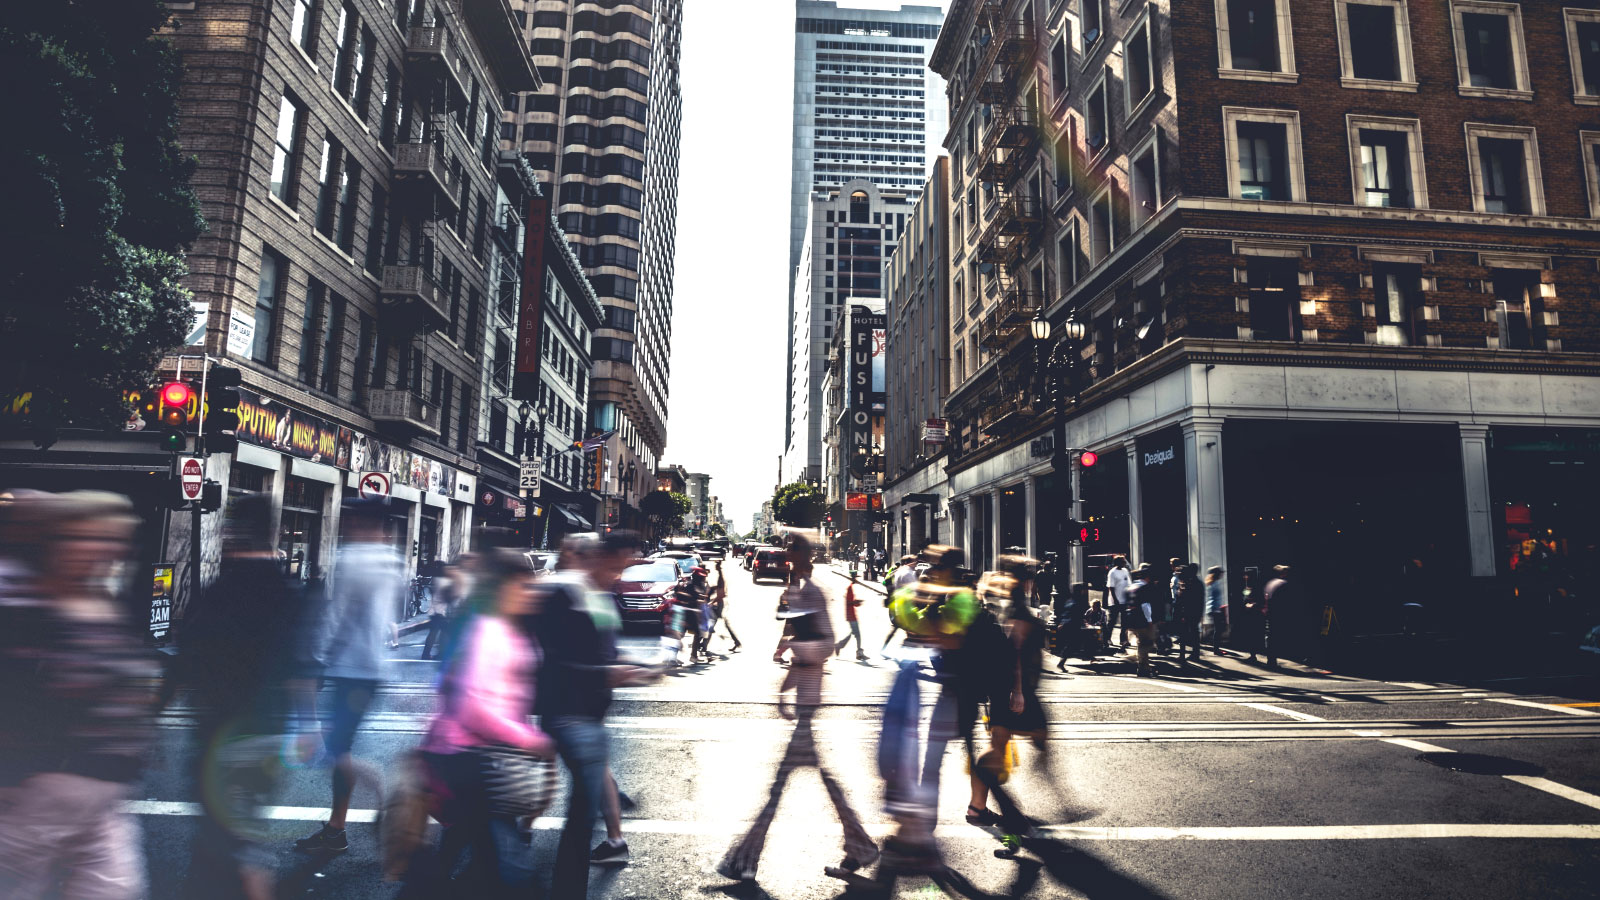 Motion-blurred people walking on a crosswalk with buildings on either side